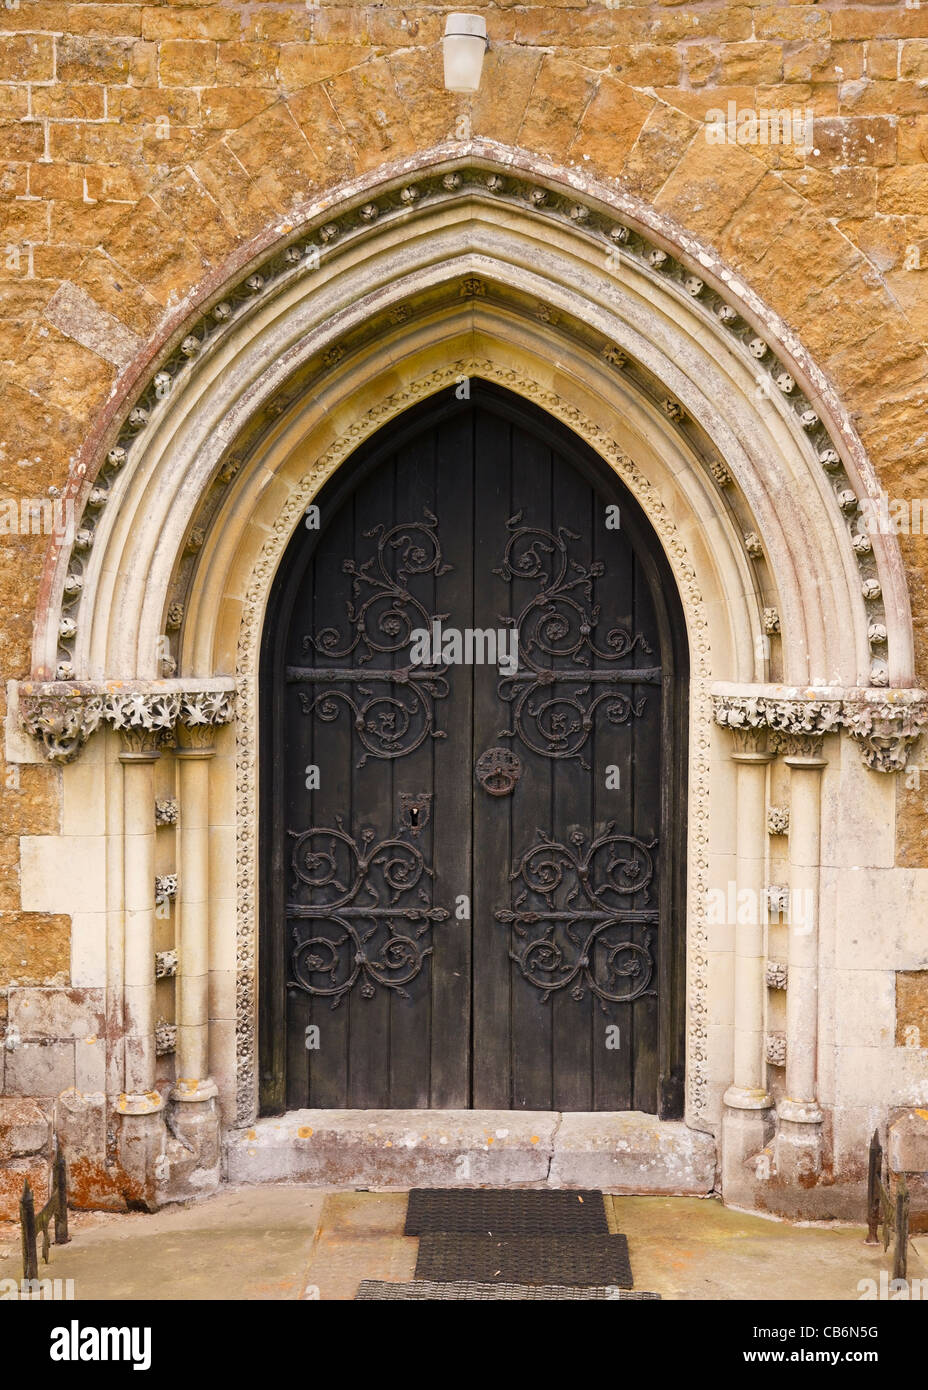 Ornate pointed Gothic arch church door with fleuron decorated hinges St James Church, Little Dalby, Leicestershire, England, UK Stock Photo